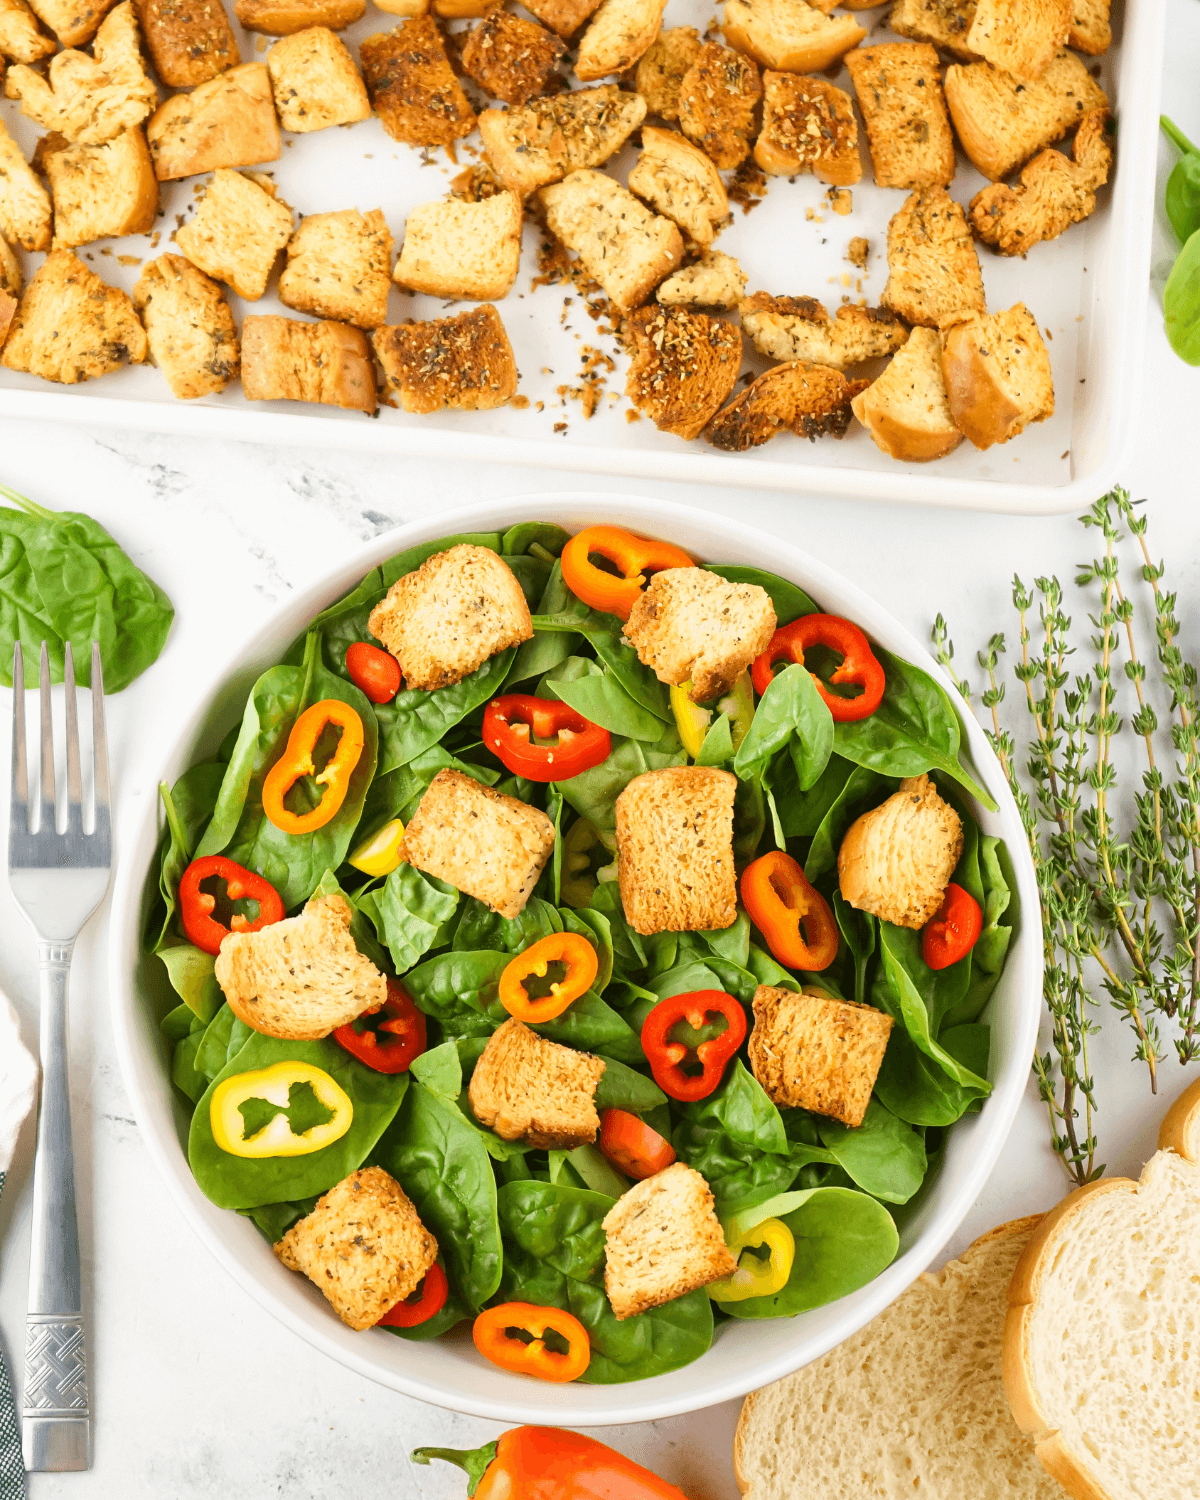 A bowl of spinach salad with homemade croutons and peppers.